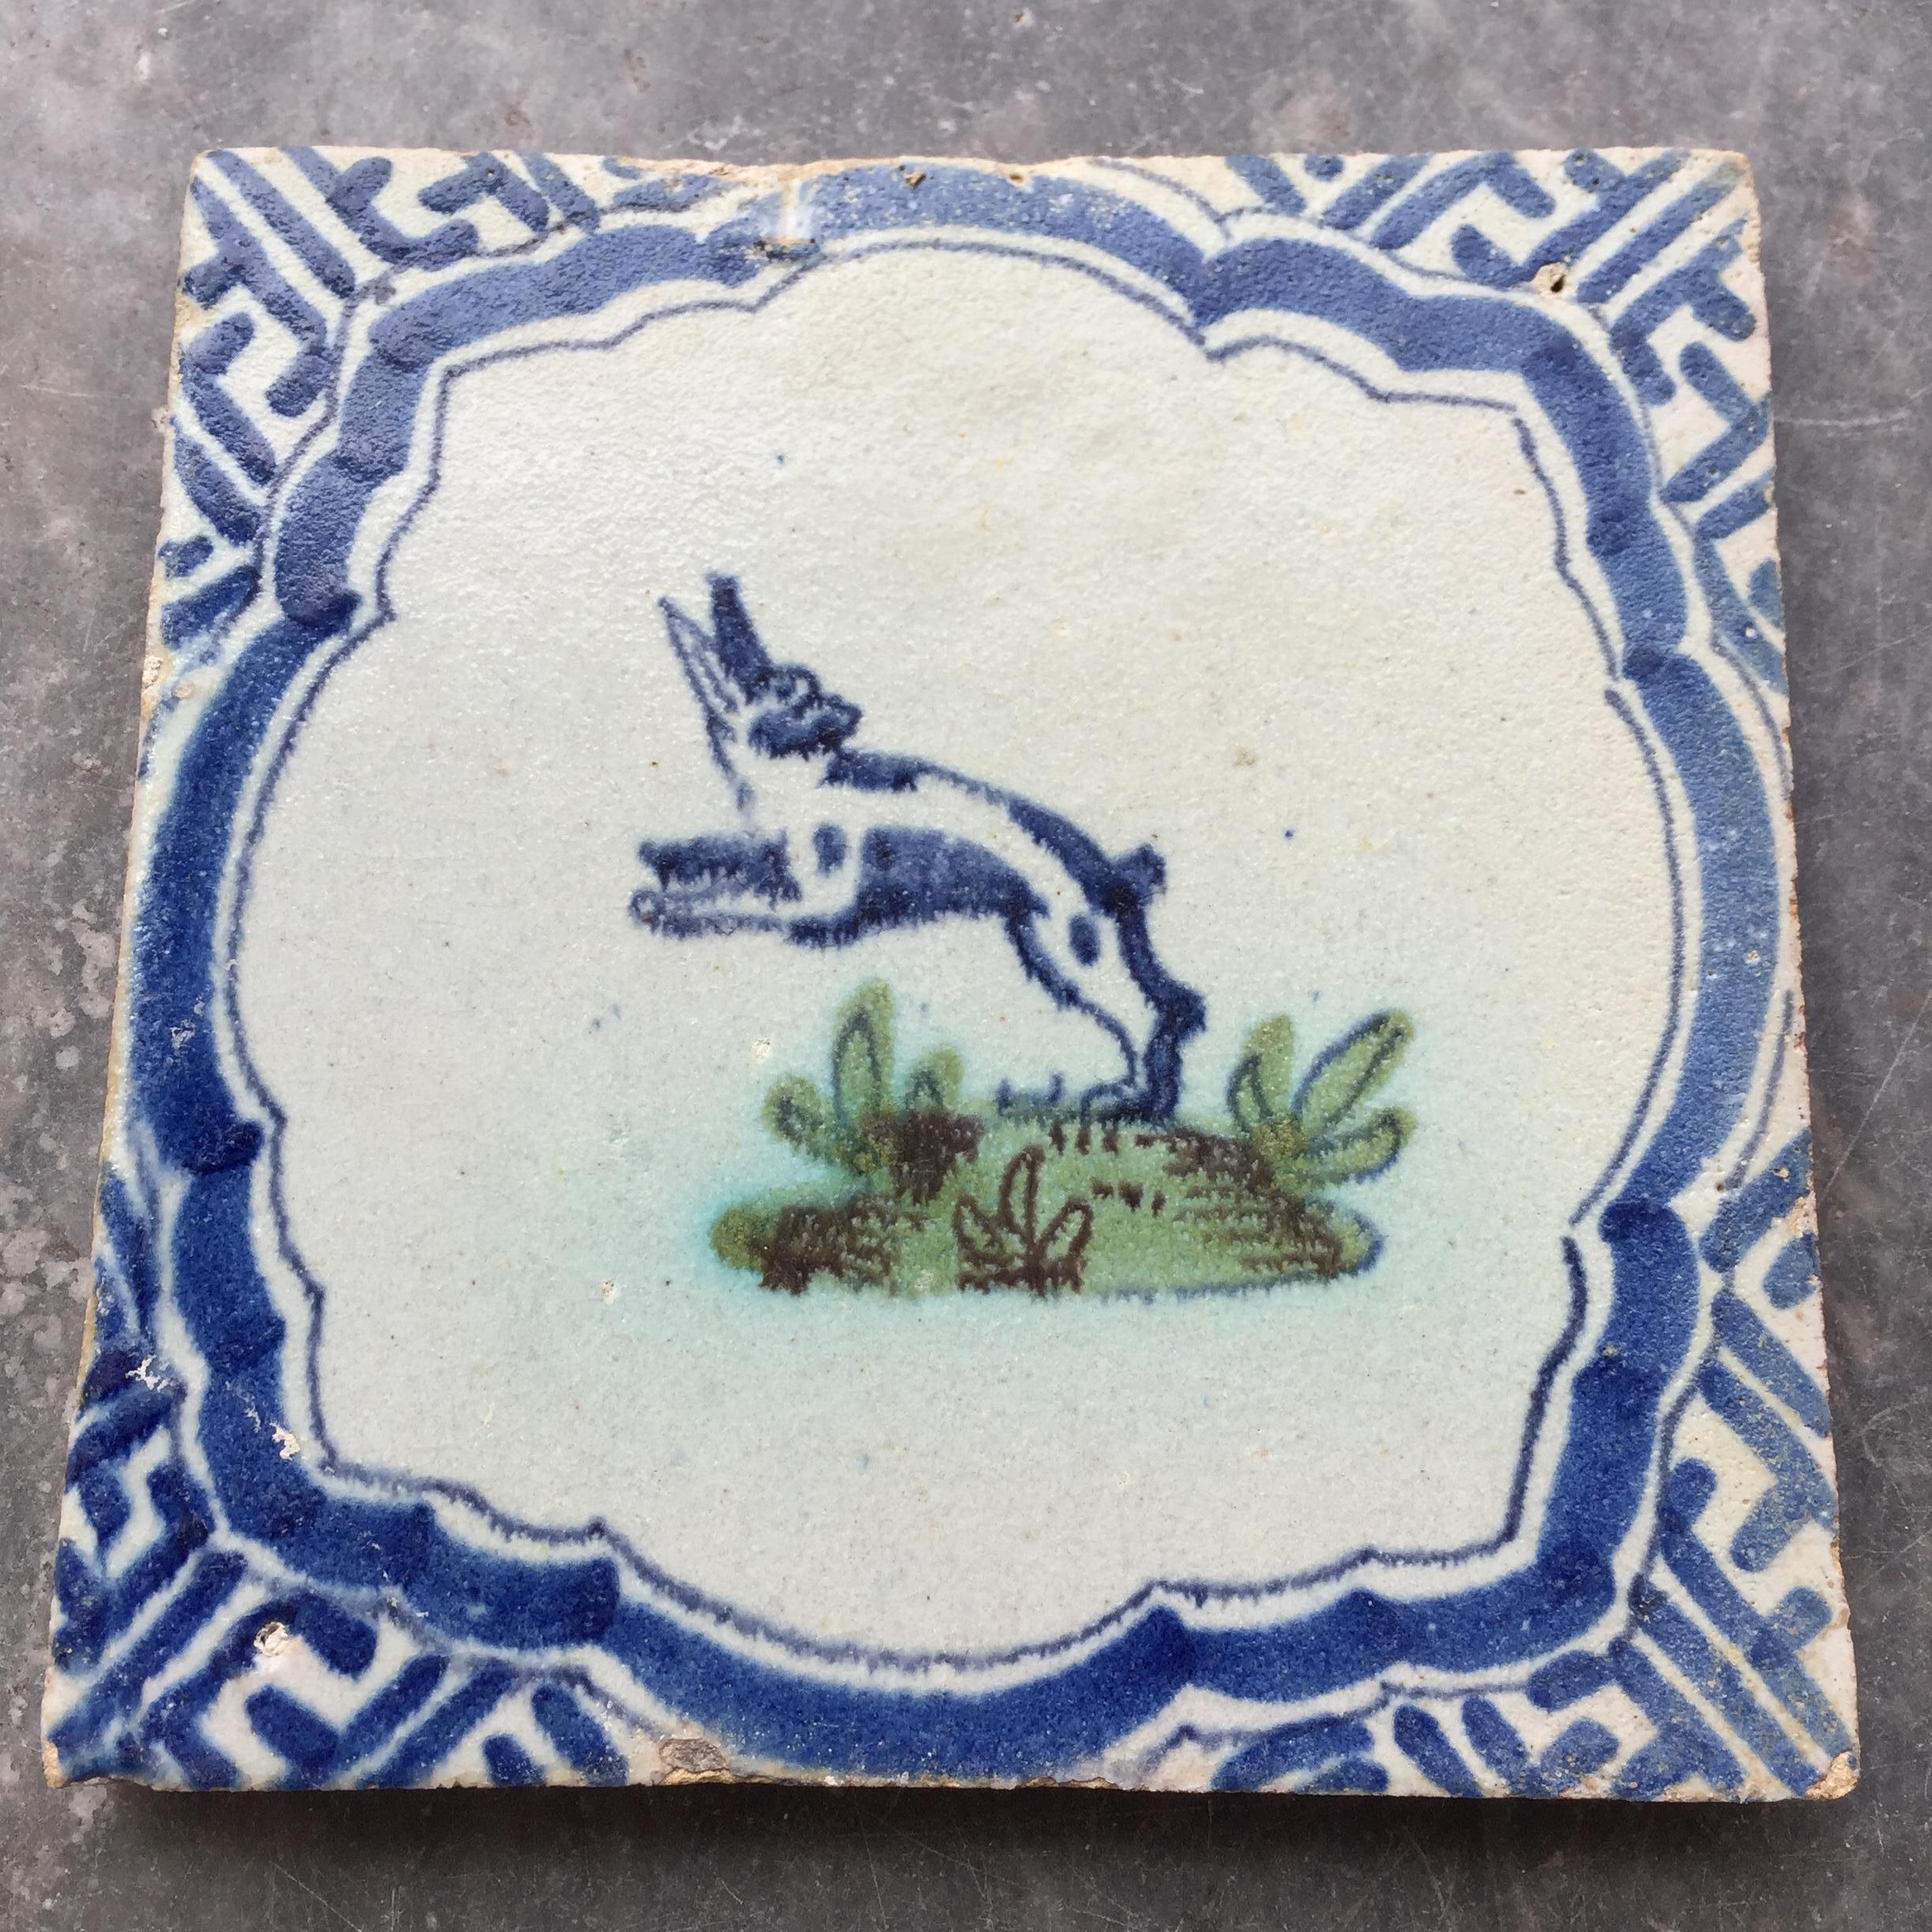 Hand-Painted Blue and White Dutch Delft Tile with Hare, Mid 17th Century